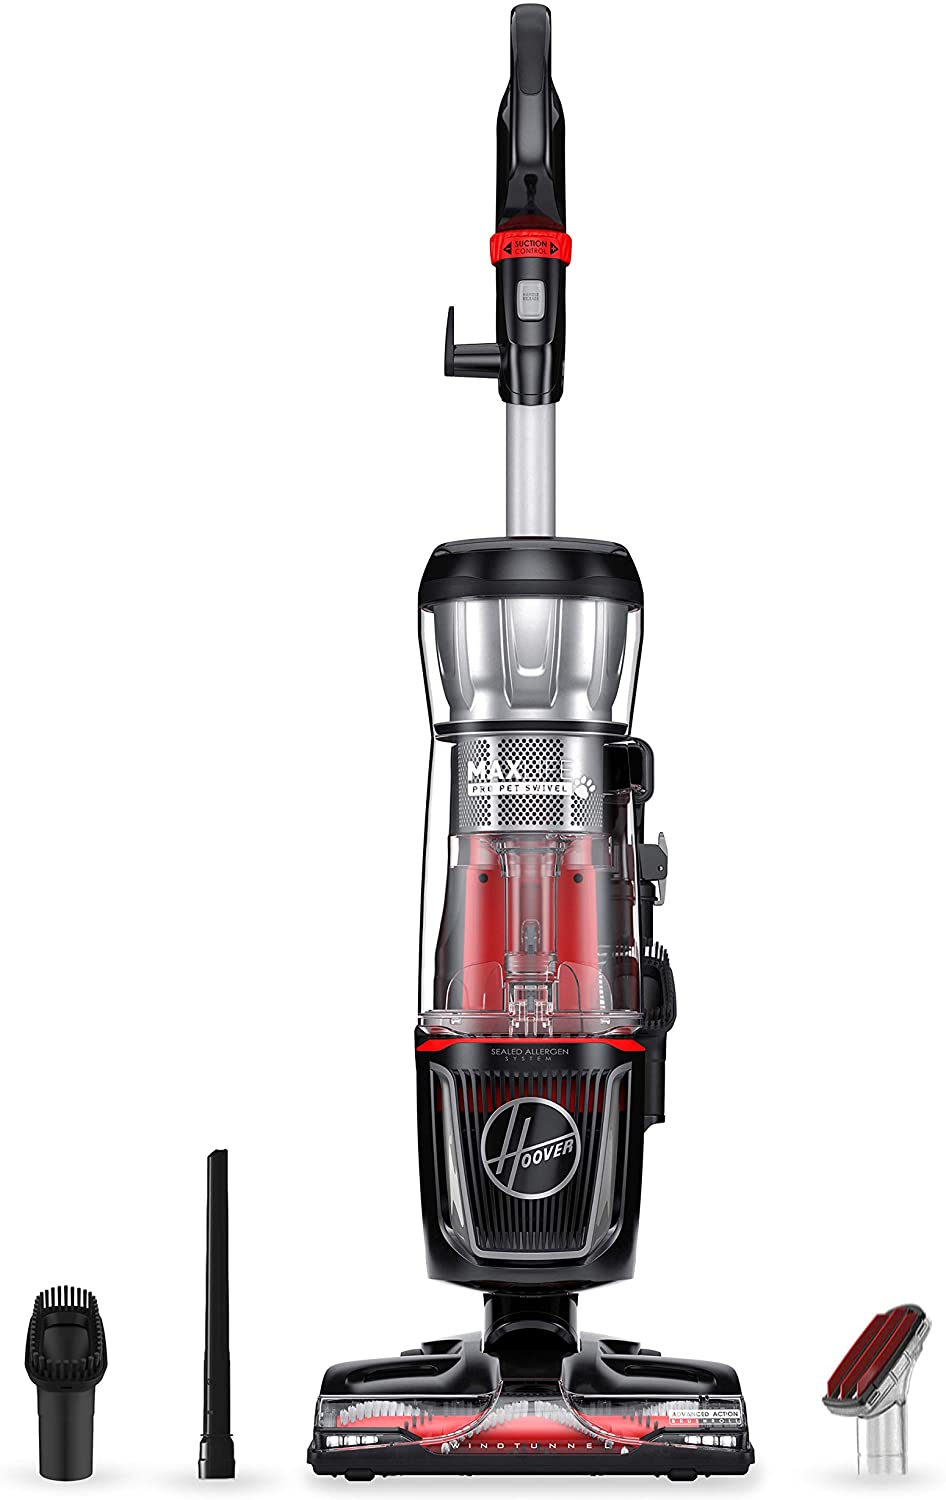 Hoover MAXLife Pro Pet Swivel HEPA Media Vacuum, Bagless Upright for Pets Hair and Home, Black, UH74220PC - image 1 of 7